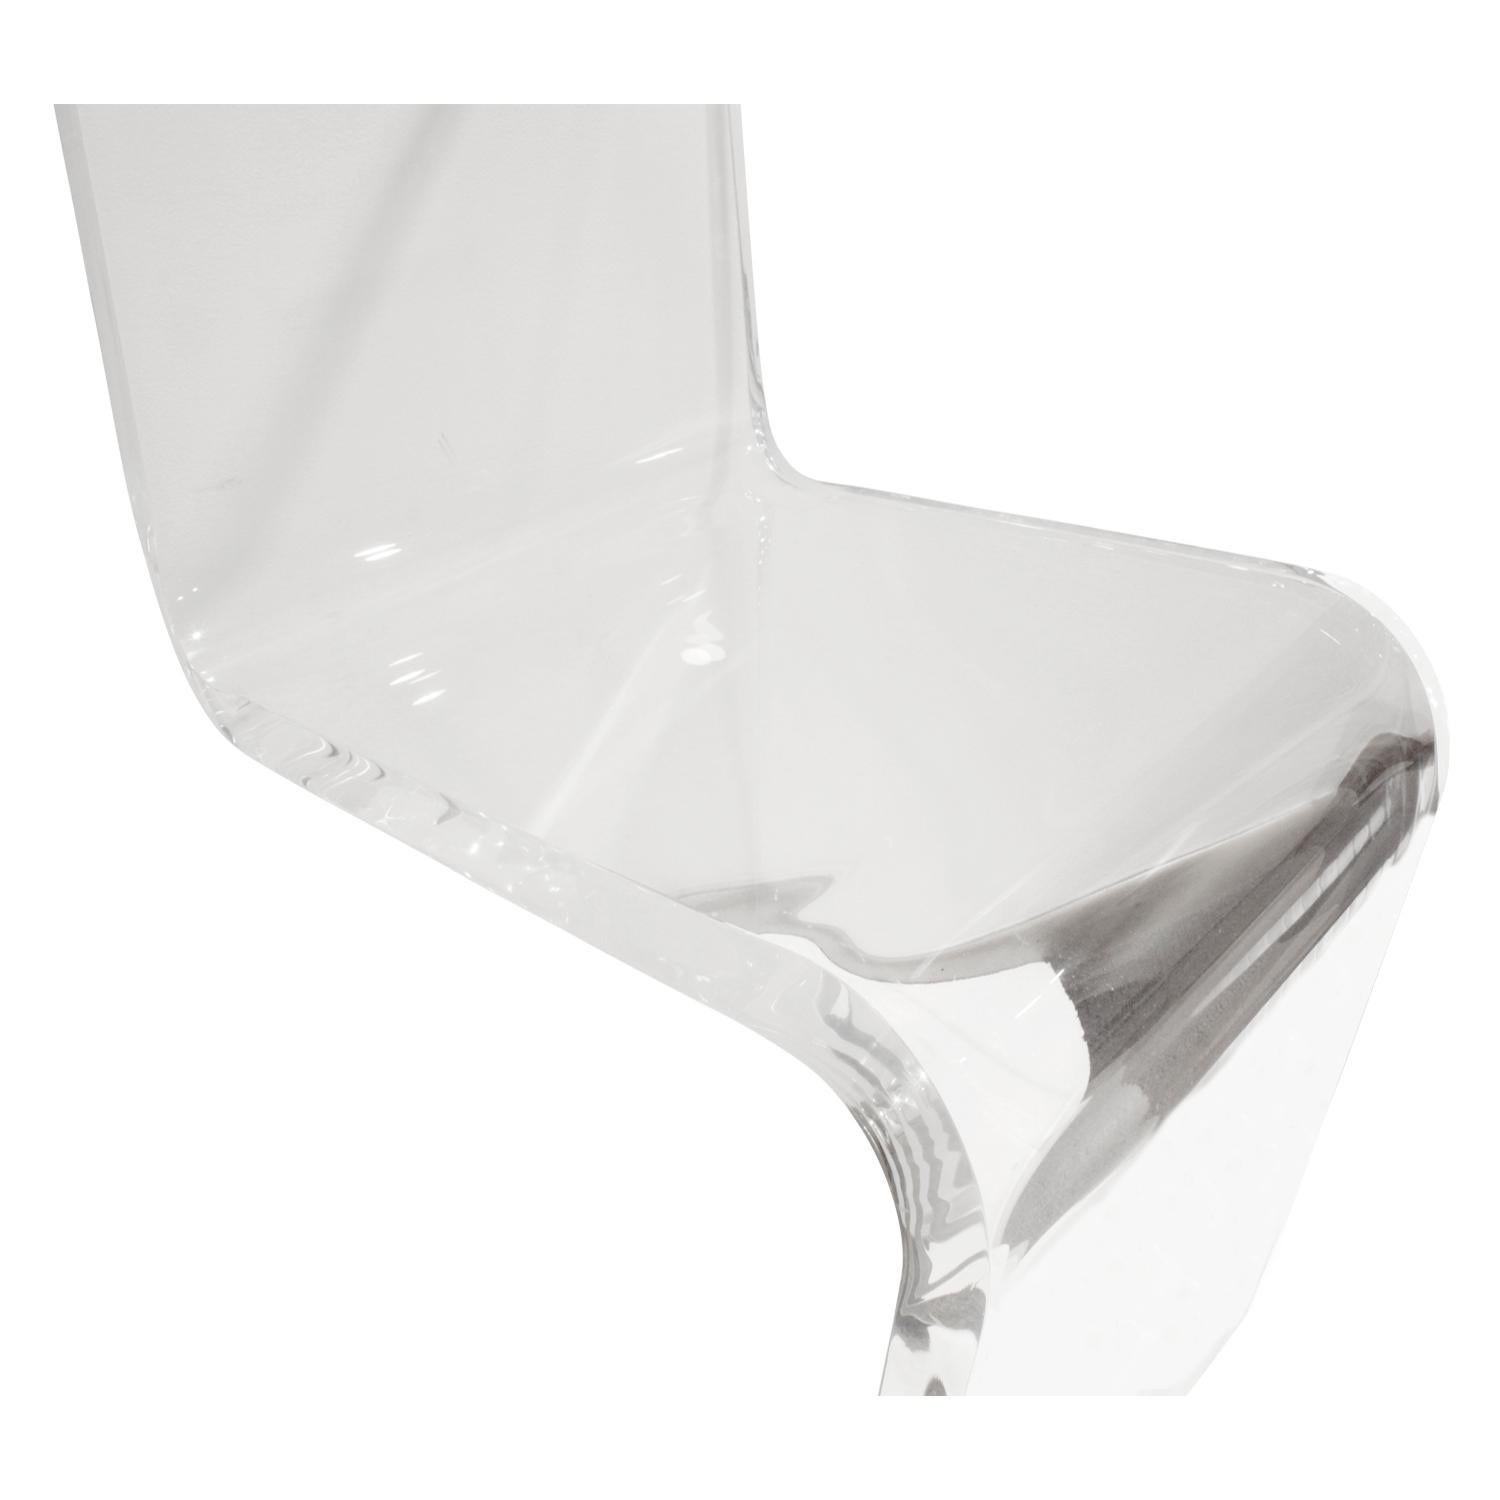 Hand-Crafted Sculptural Thick Molded Lucite Chair, 1970s